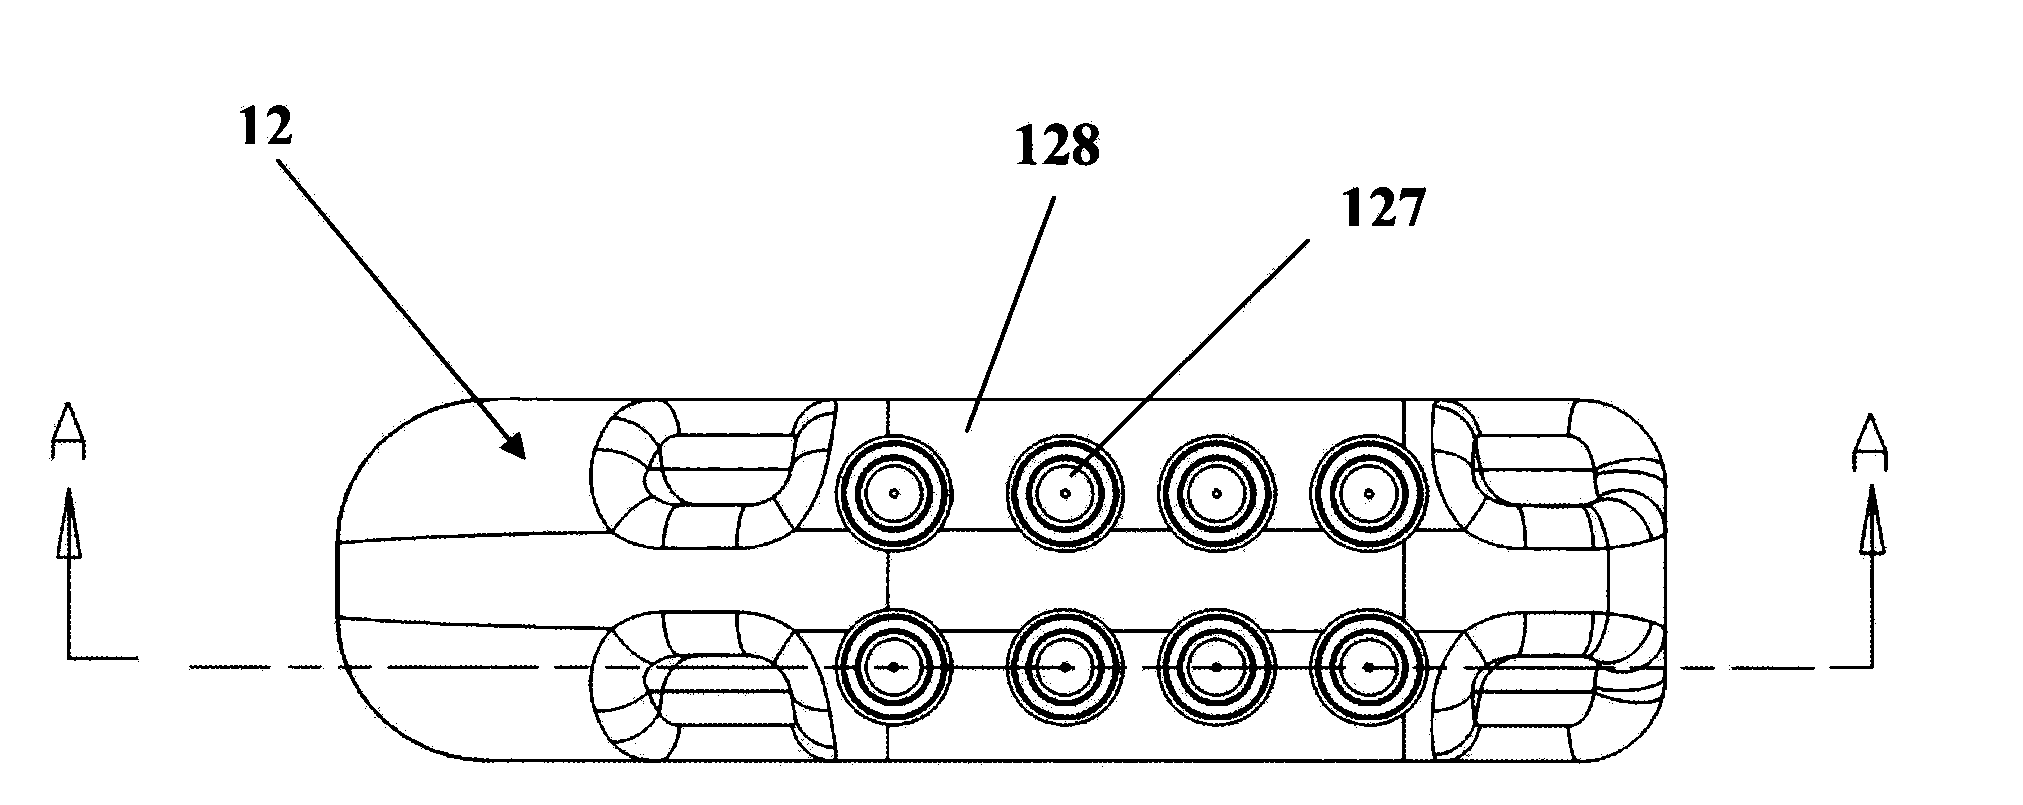 Implantable medical device and system with structure for preventing screw-out of screws